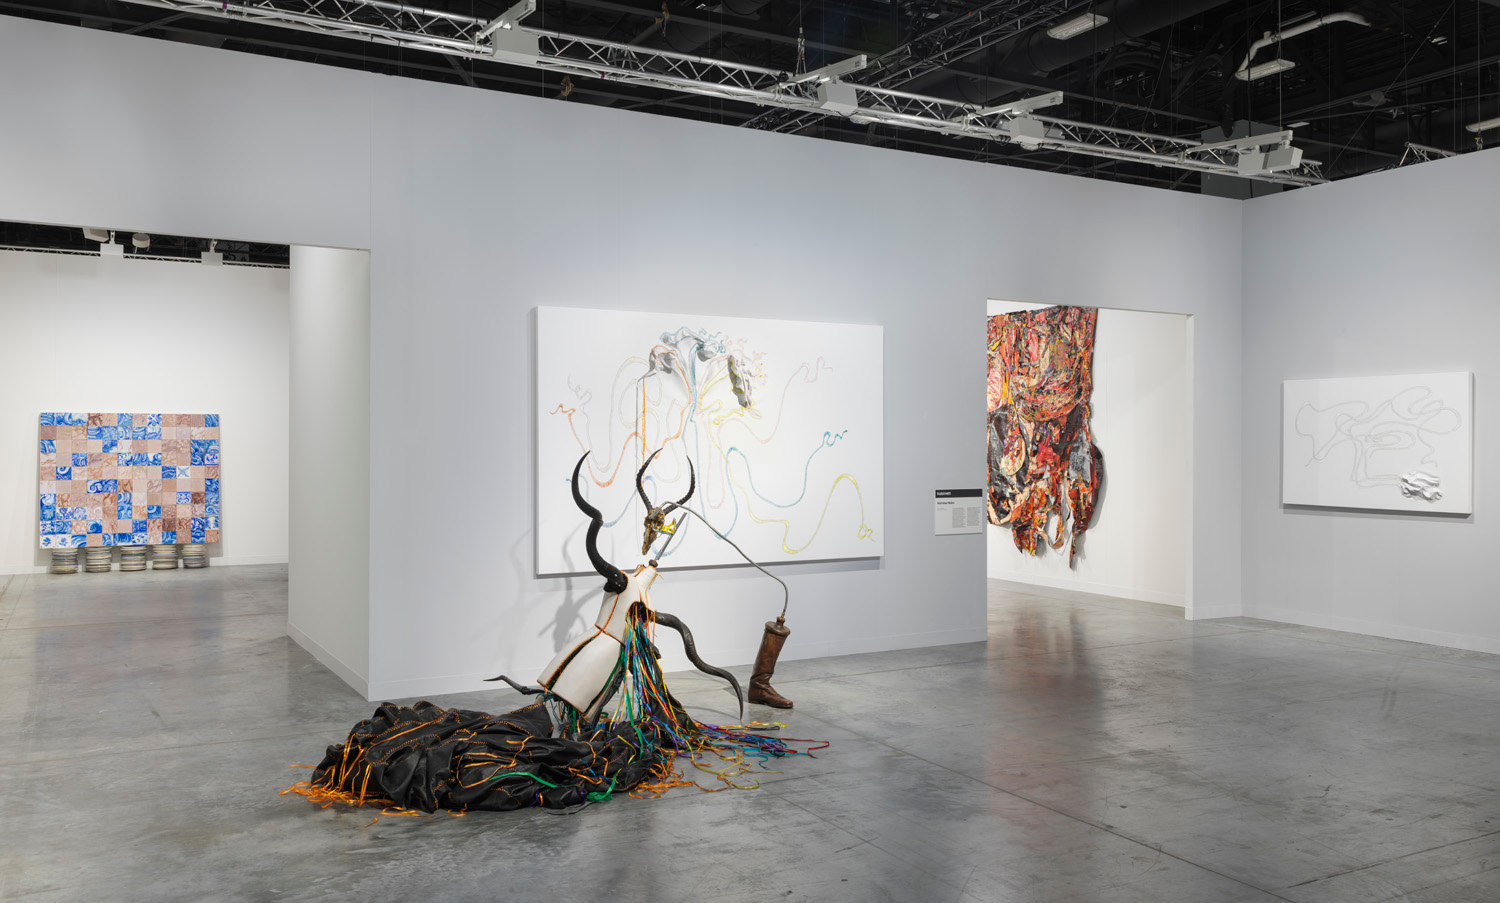 Installation view of Lehmann Maupin's booth at Art Basel Miami Beach 2018, view 4. Kabinett section featuring Nicholas Hlobo